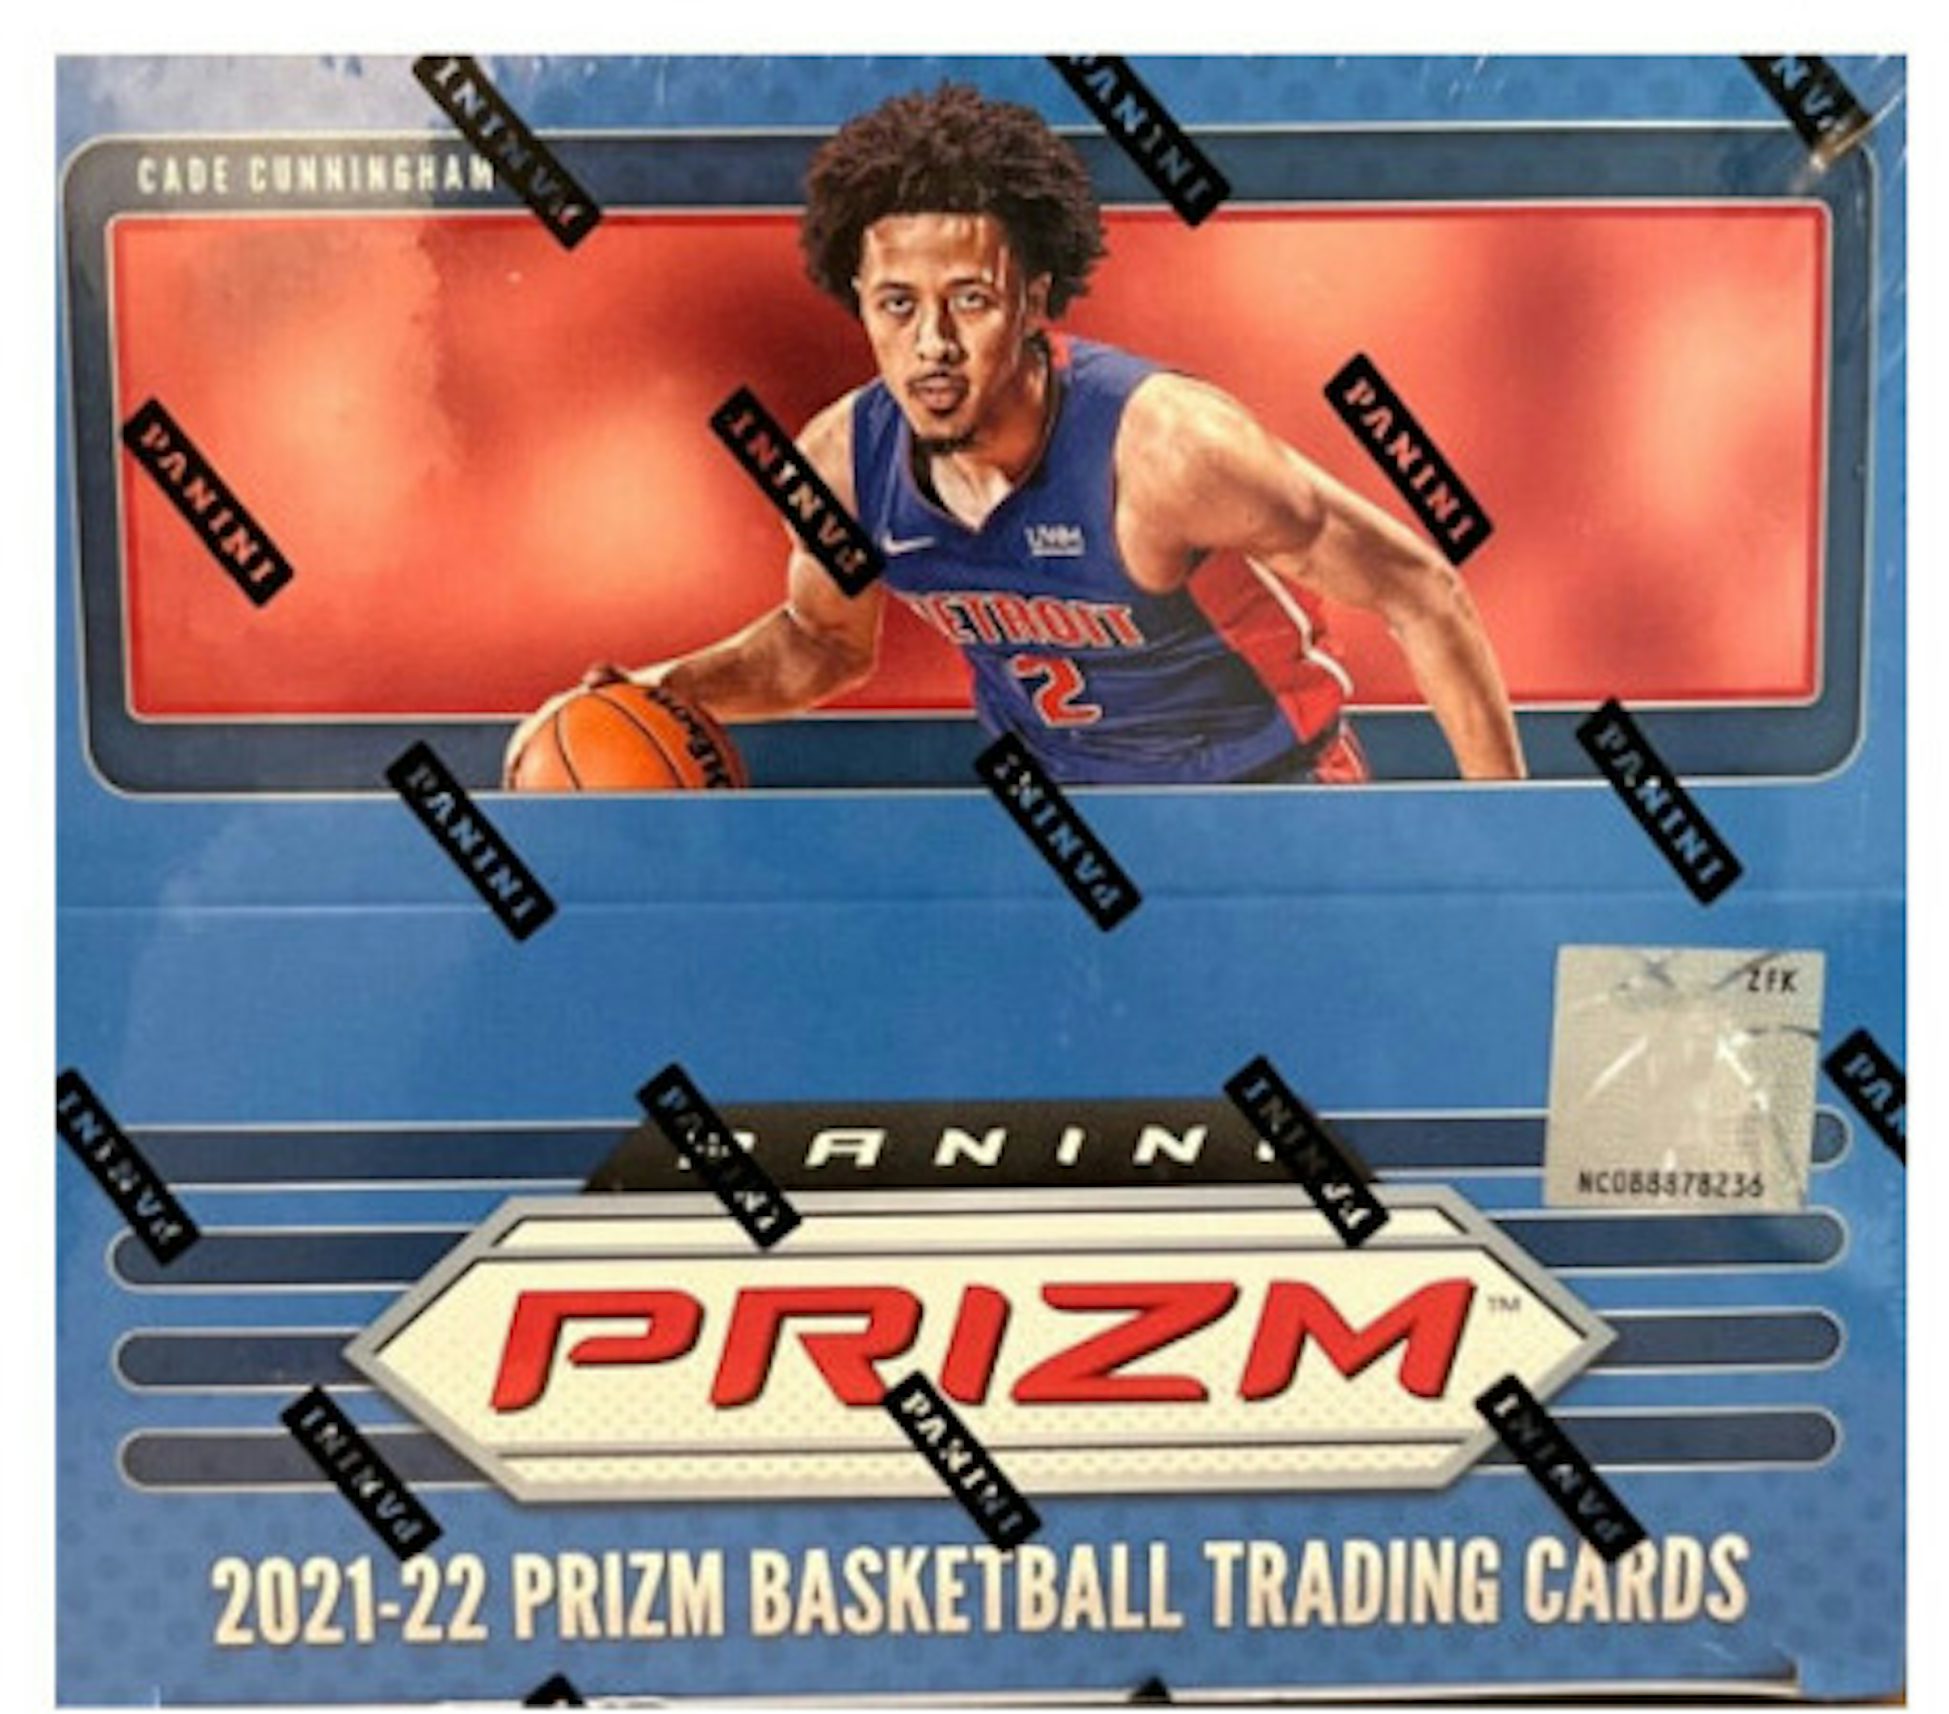 https://images.stockx.com/images/2021-22-Panini-Prizm-Basketball-24-Pack-Retail-Box-Updated.jpg?fit=fill&bg=FFFFFF&w=1200&h=857&fm=jpg&auto=compress&dpr=2&trim=color&updated_at=1664826640&q=60